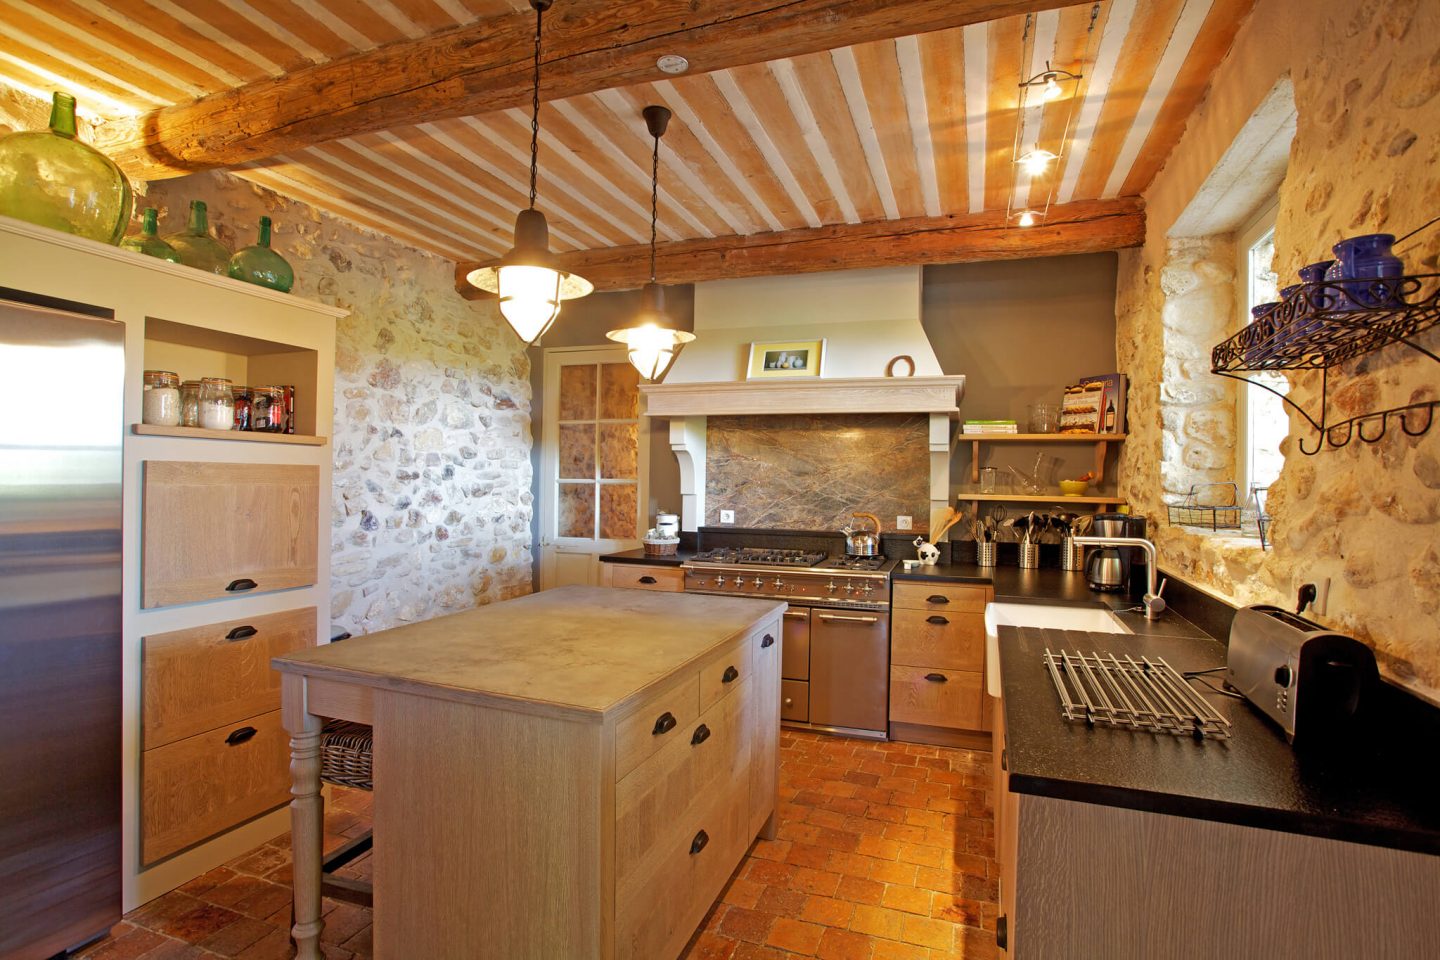 Come discover rustic elegance, ancient stone, and beautiful rugged beams within a Provencal villa - then stay for the paint color and decor Ideas! #frenchcountry #oldworld #interiordesign #provence